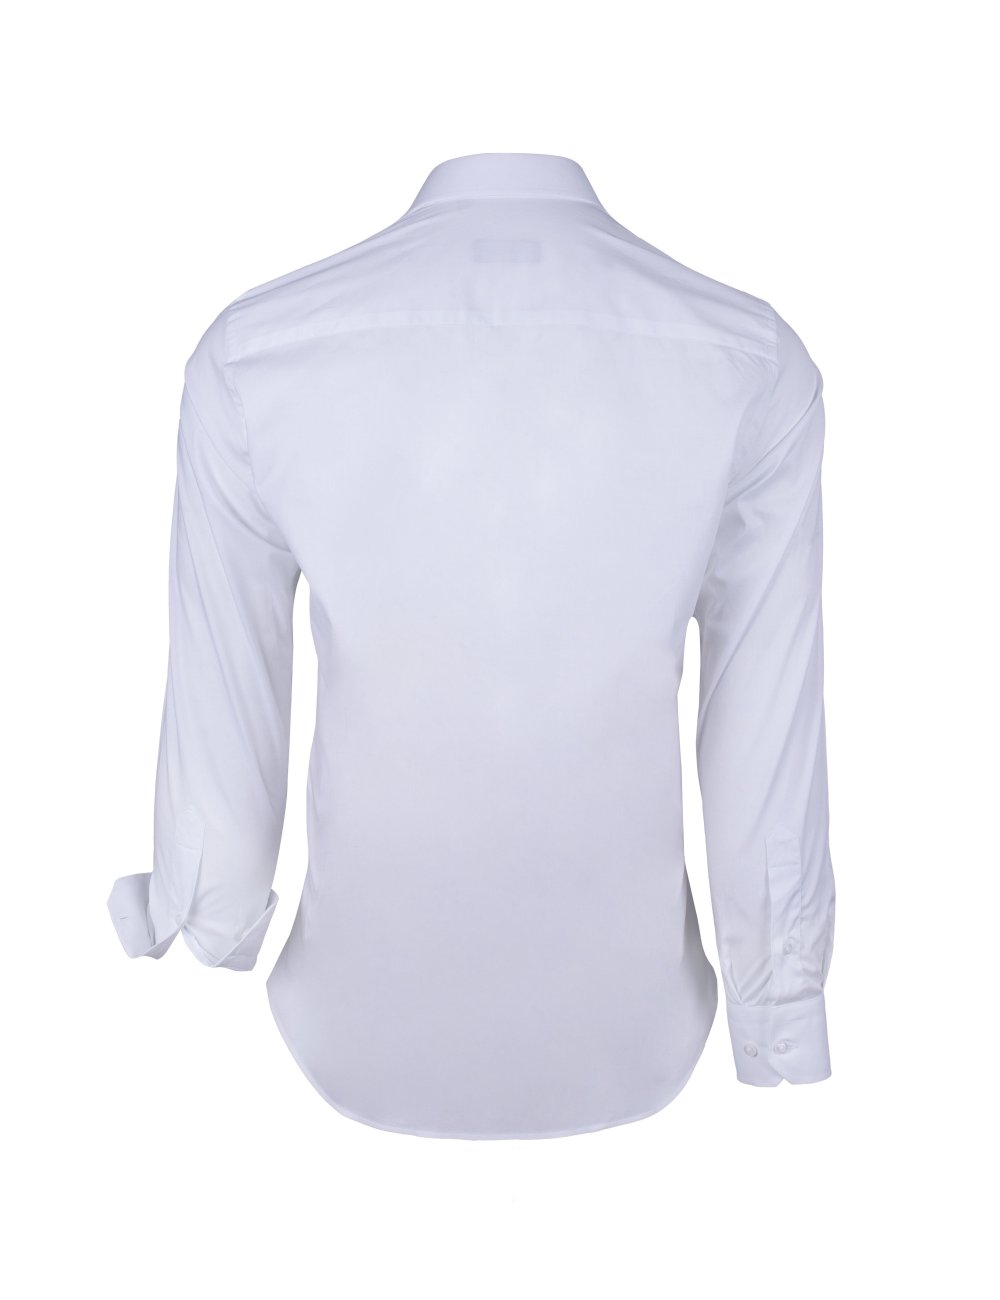 Chemise homme blanche face